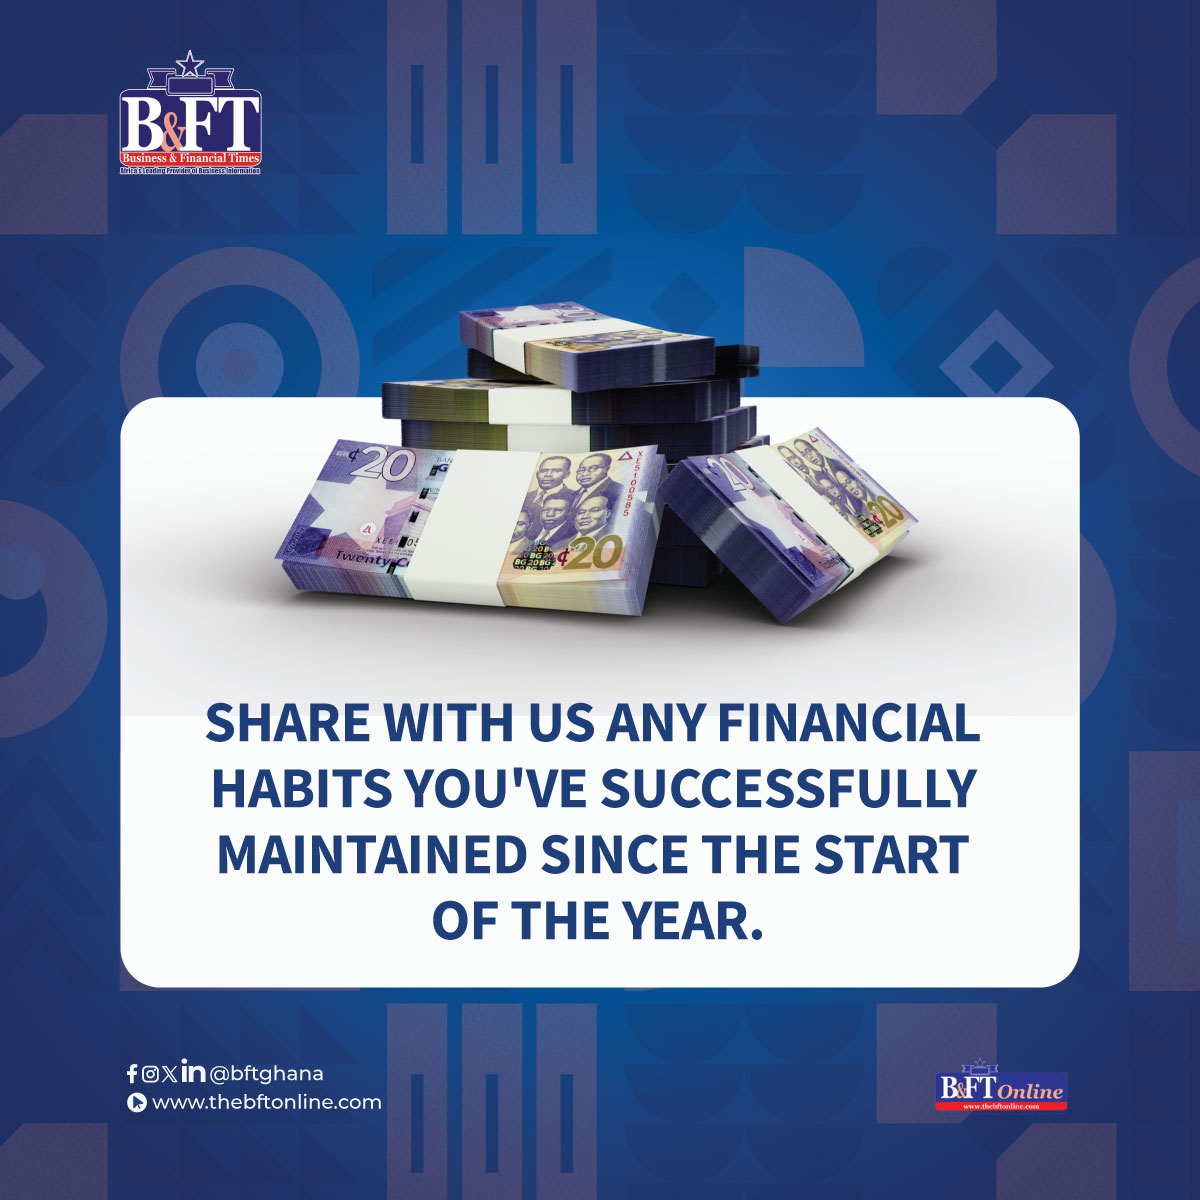 What financial habits have you been sticking to since the year kicked off? Share your success stories and let's keep ourselves motivated to stay on track.

#BFTOnline
#FinancialGoals
#FinancialWins
#SmartMoneyMoves